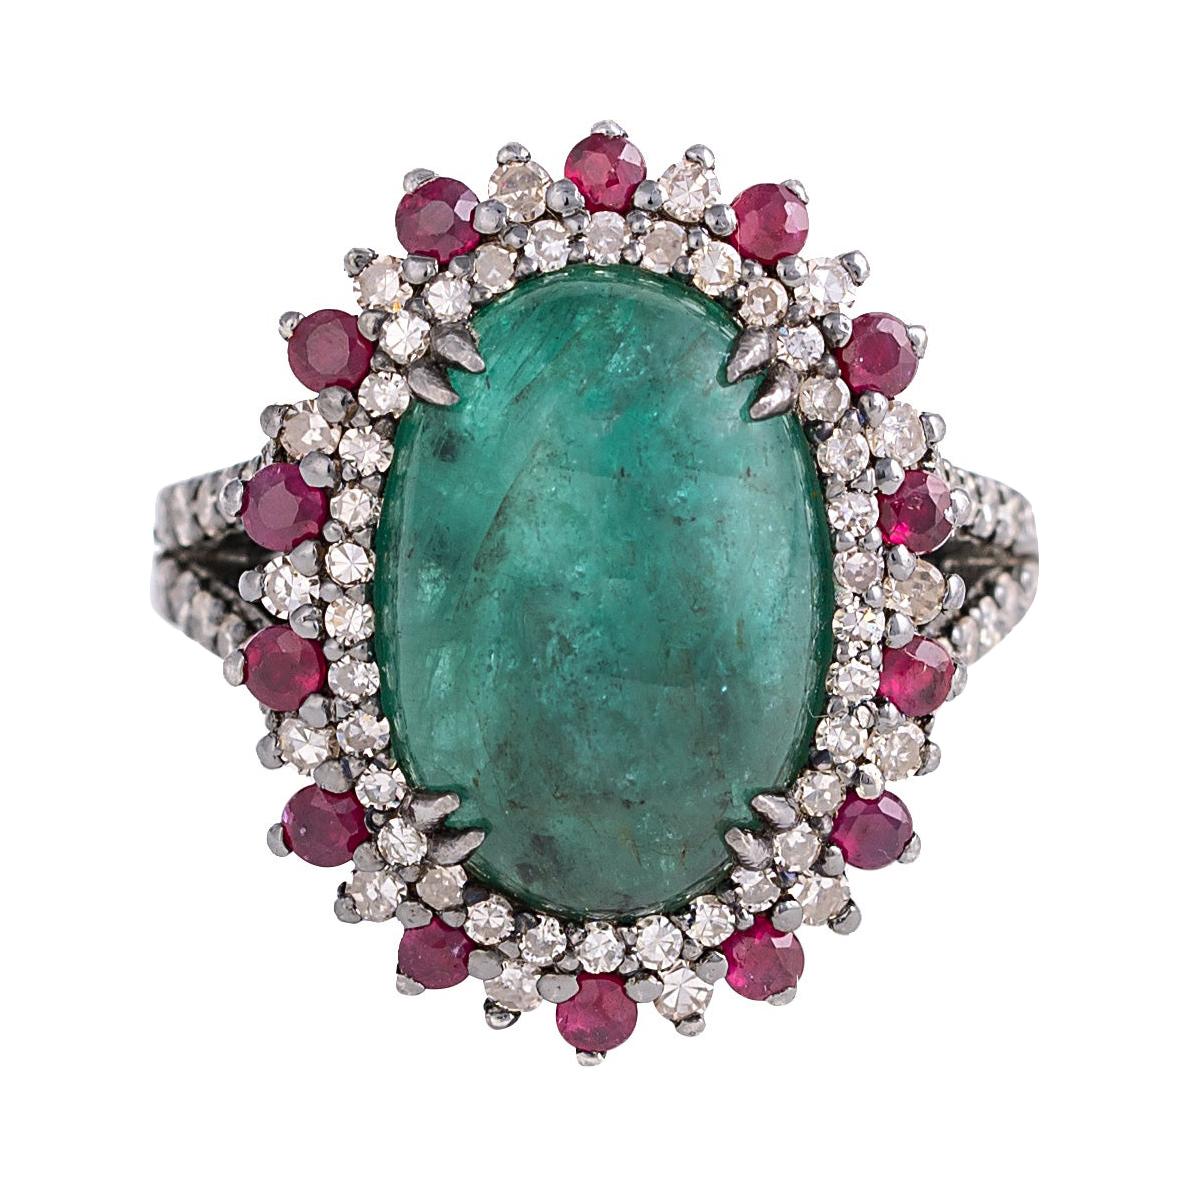 7.70 Carat Cabochon-Cut Emerald, Diamond, and Ruby Cocktail Ring in Art-Deco